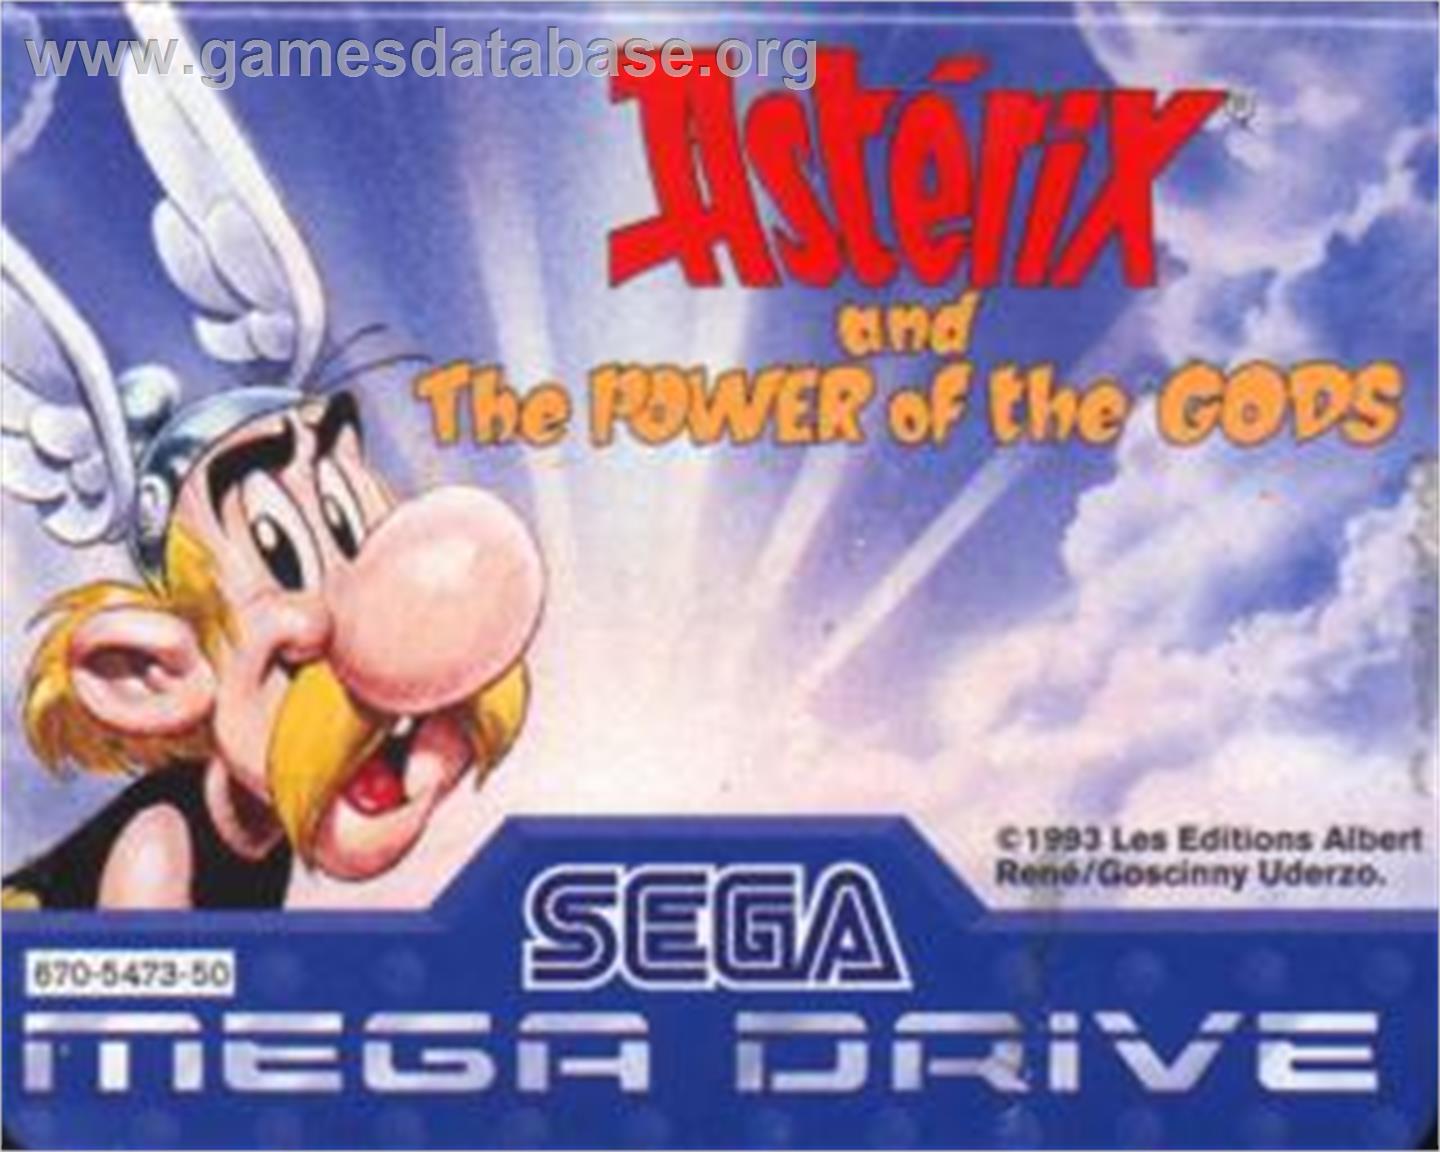 Asterix and the Power of the Gods - Sega Nomad - Artwork - Cartridge